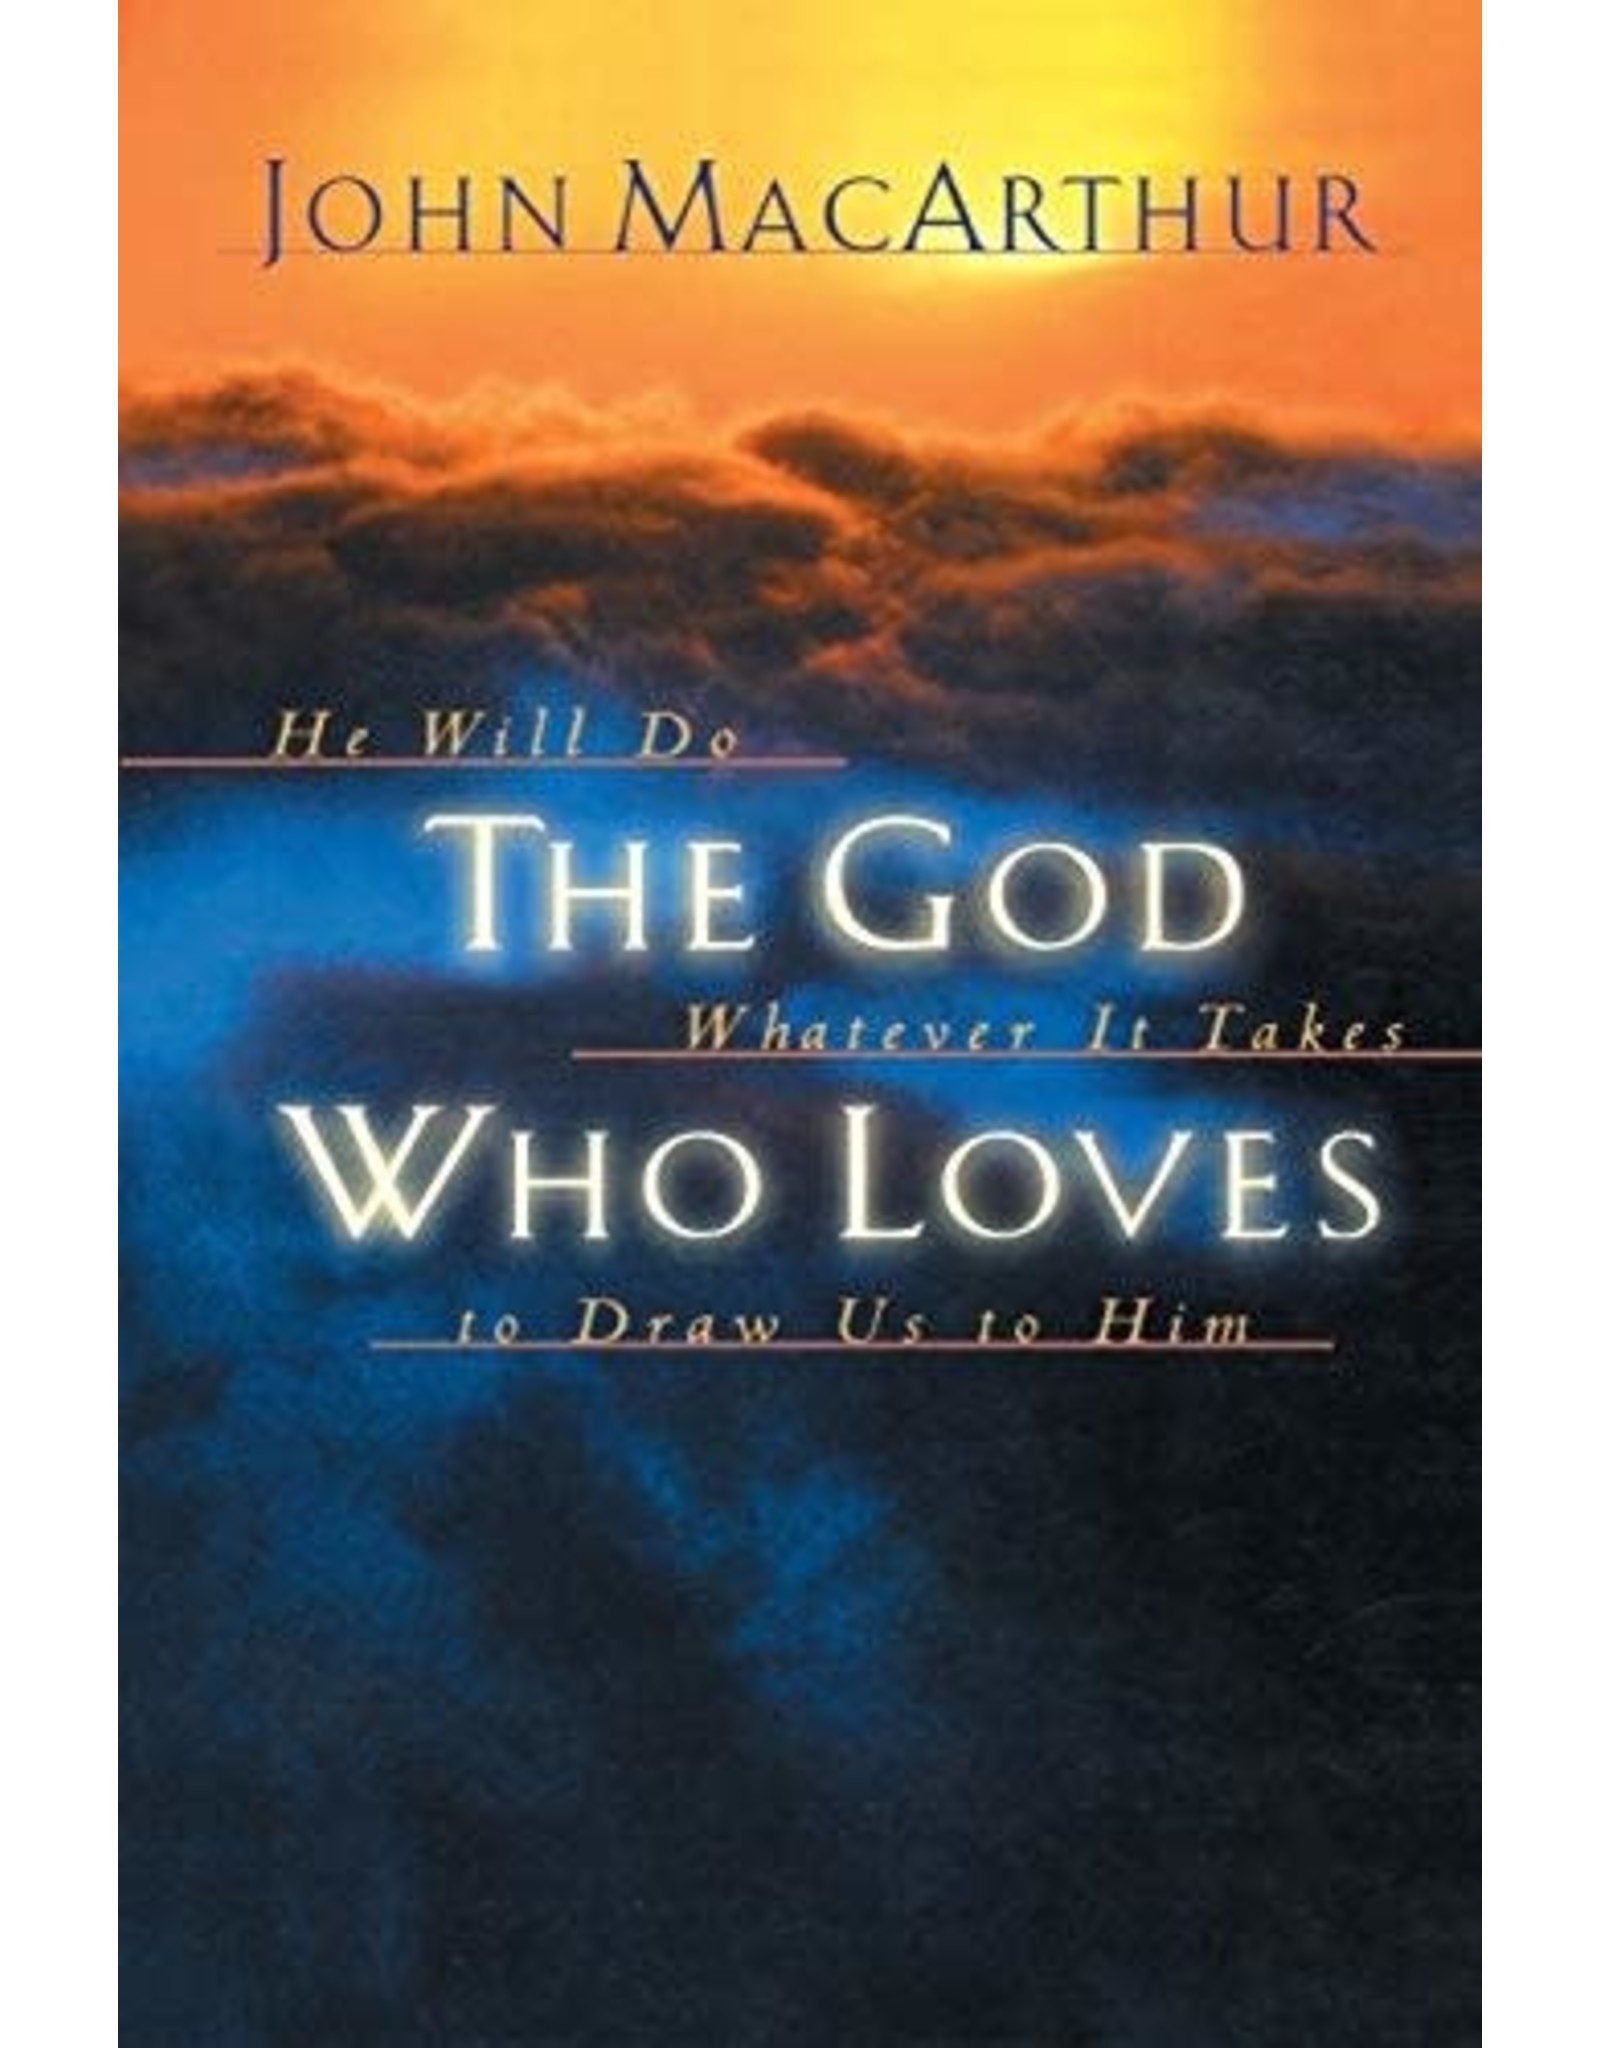 Harper Collins / Thomas Nelson / Zondervan The God Who Loves: He Will Do Whatever It Takes to Draw Us to Him